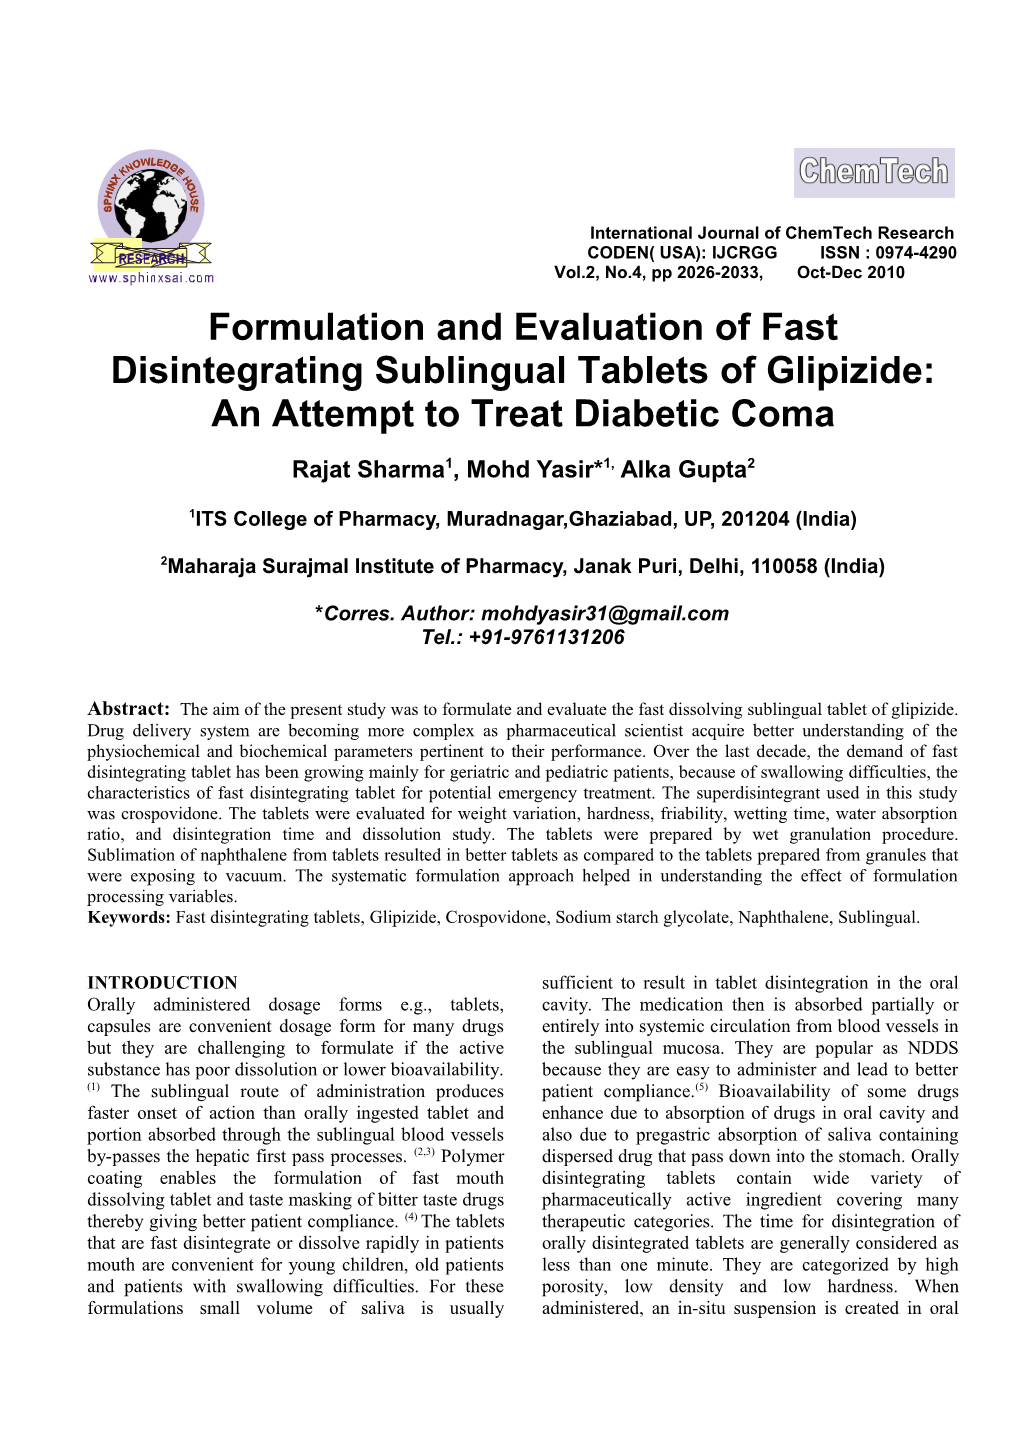 Formulation and Evaluation of Fast Disintegrating Sublingual Tablet of Glipizide: an Attempt